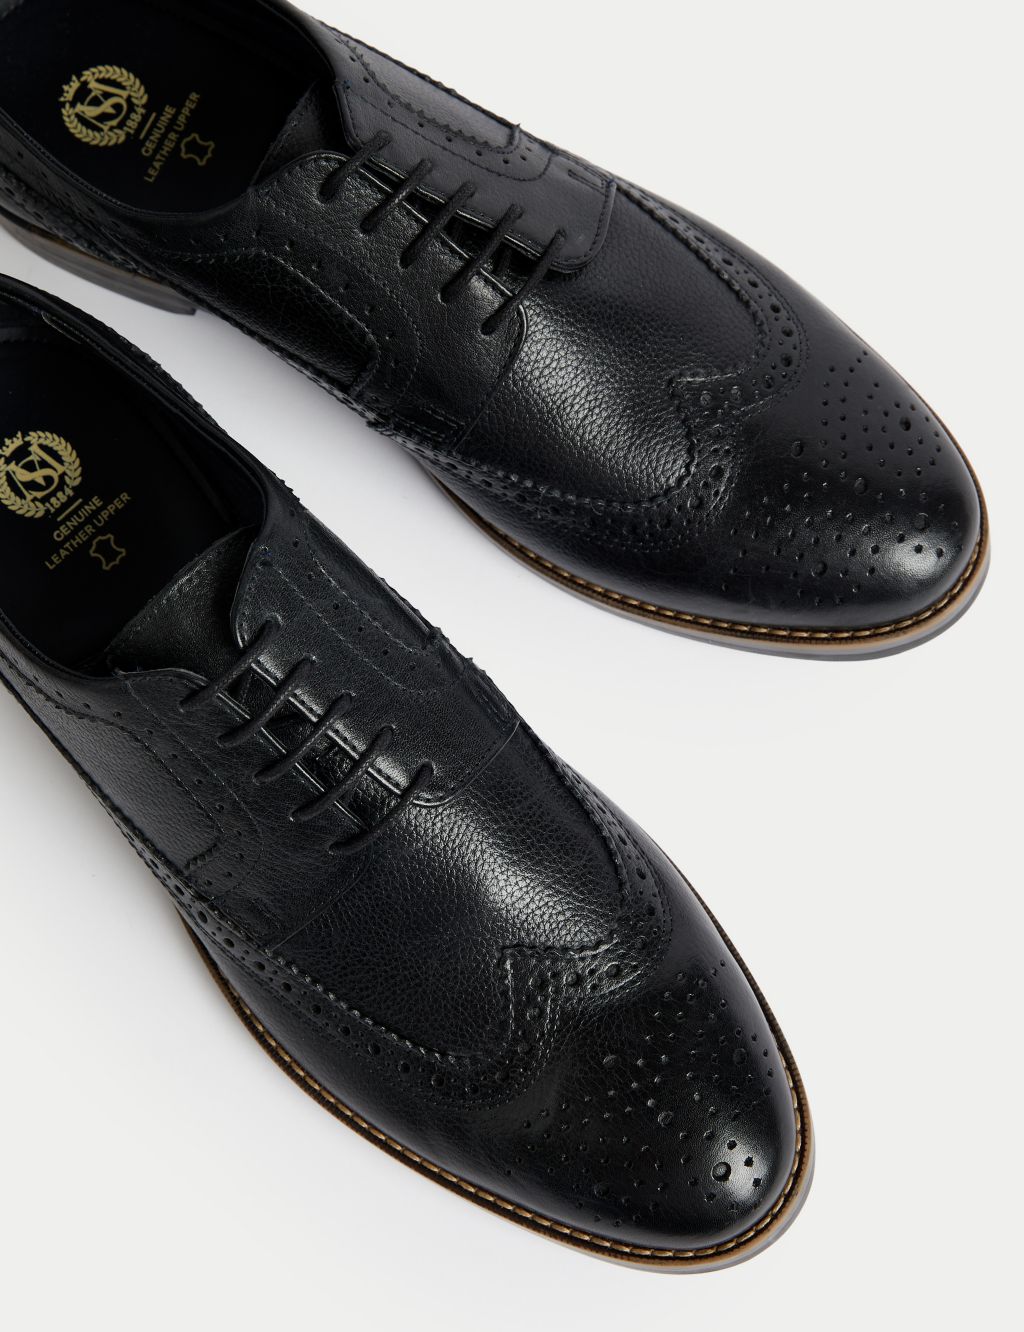 Leather Trisole Brogues image 3